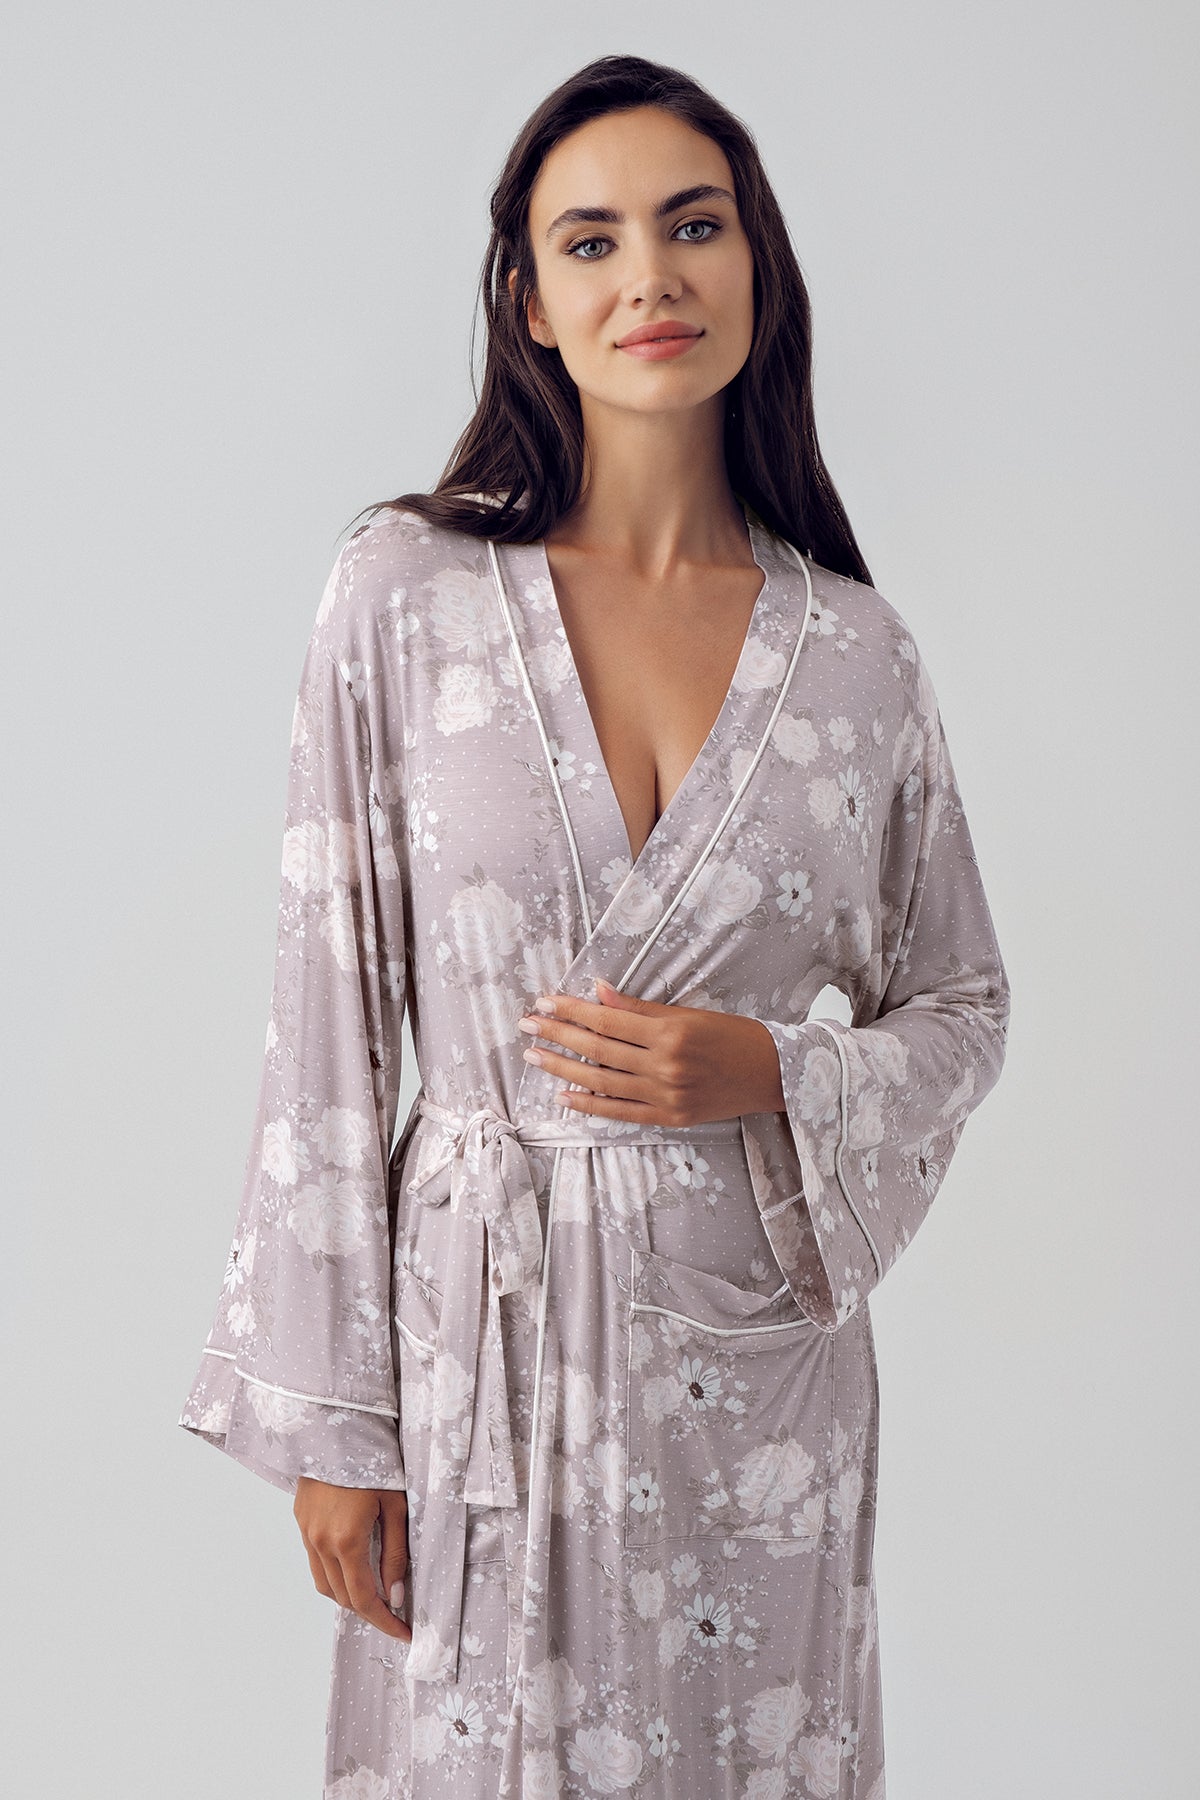 Shopymommy 15504 Flower Patterned Maternity Robe Coffee